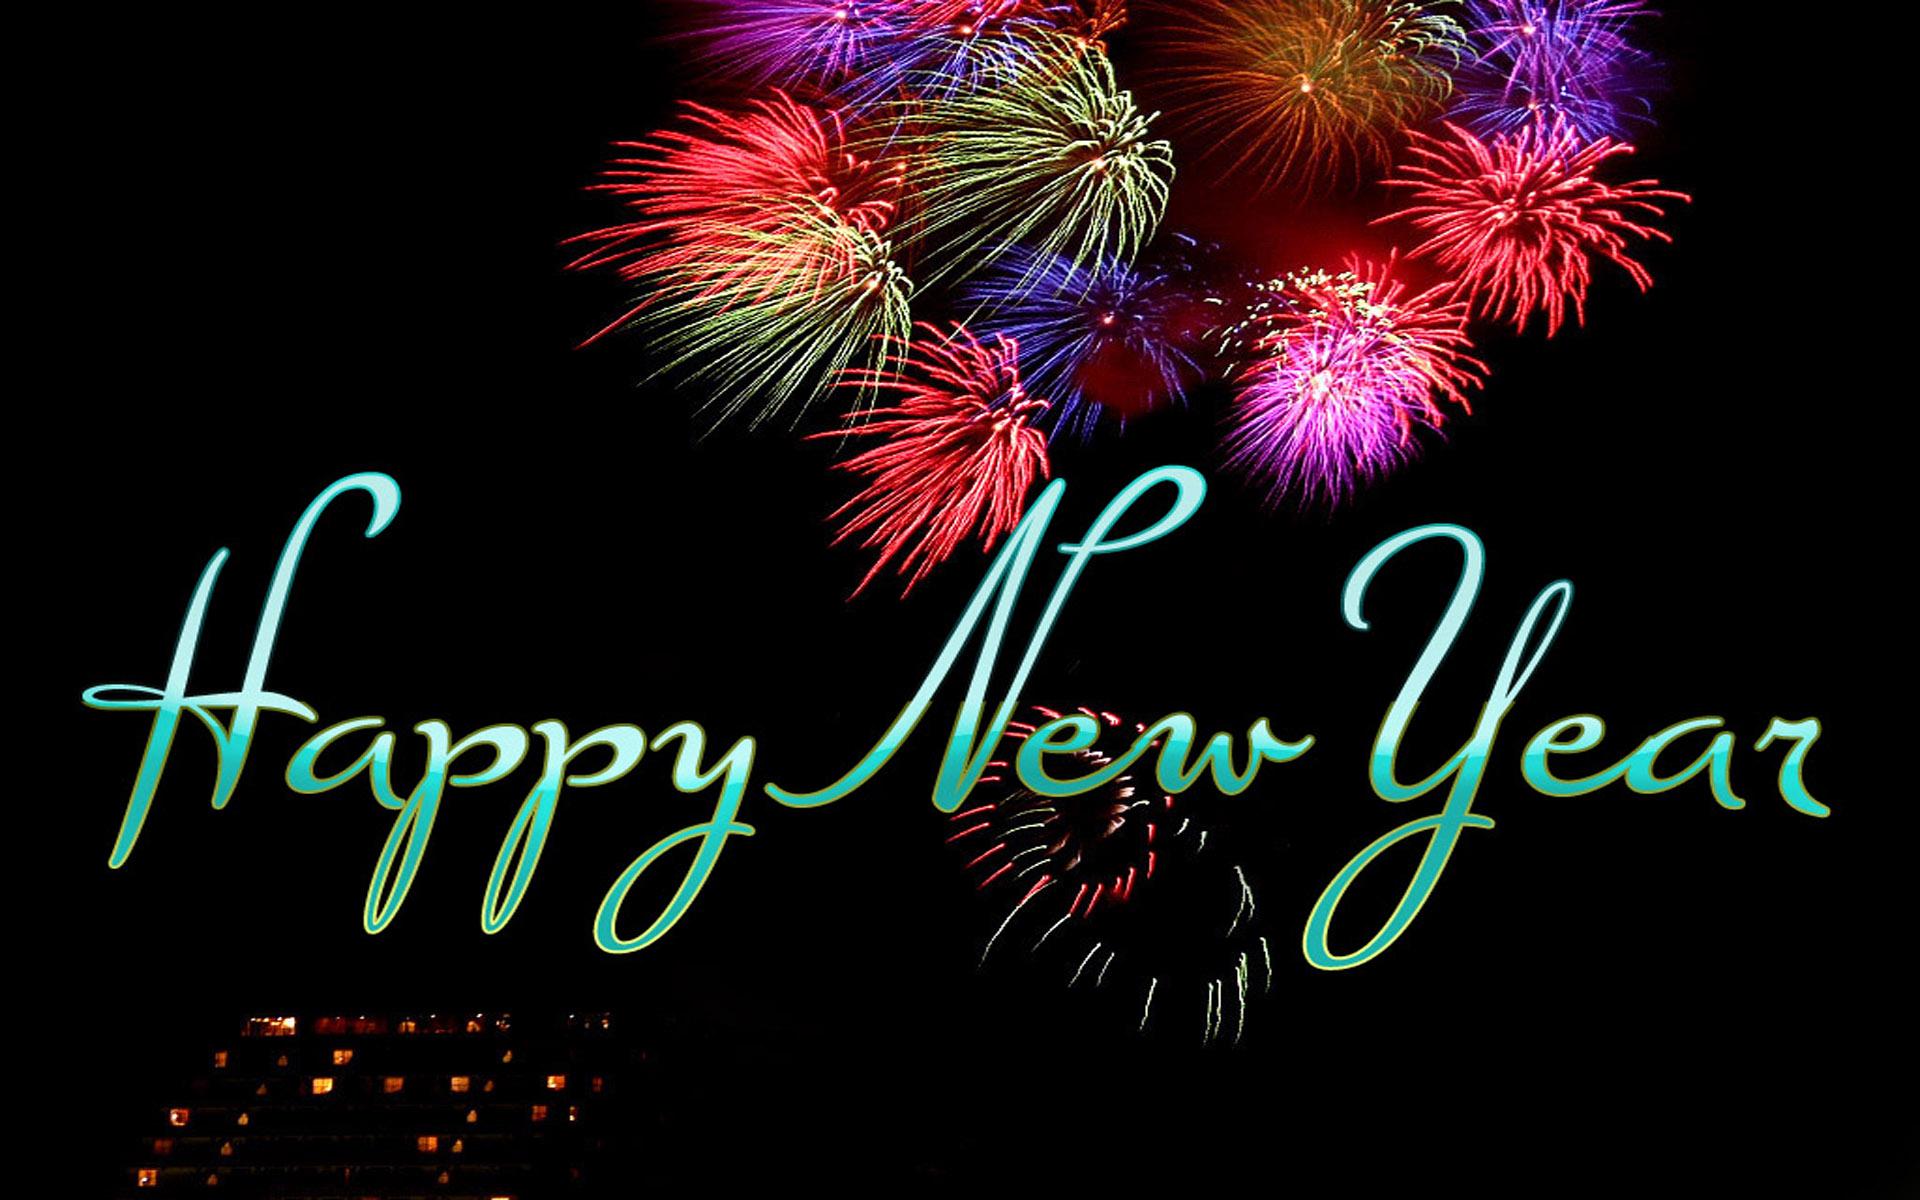 Happy New Year GIFs 2021 and Animated Wallpapers Download